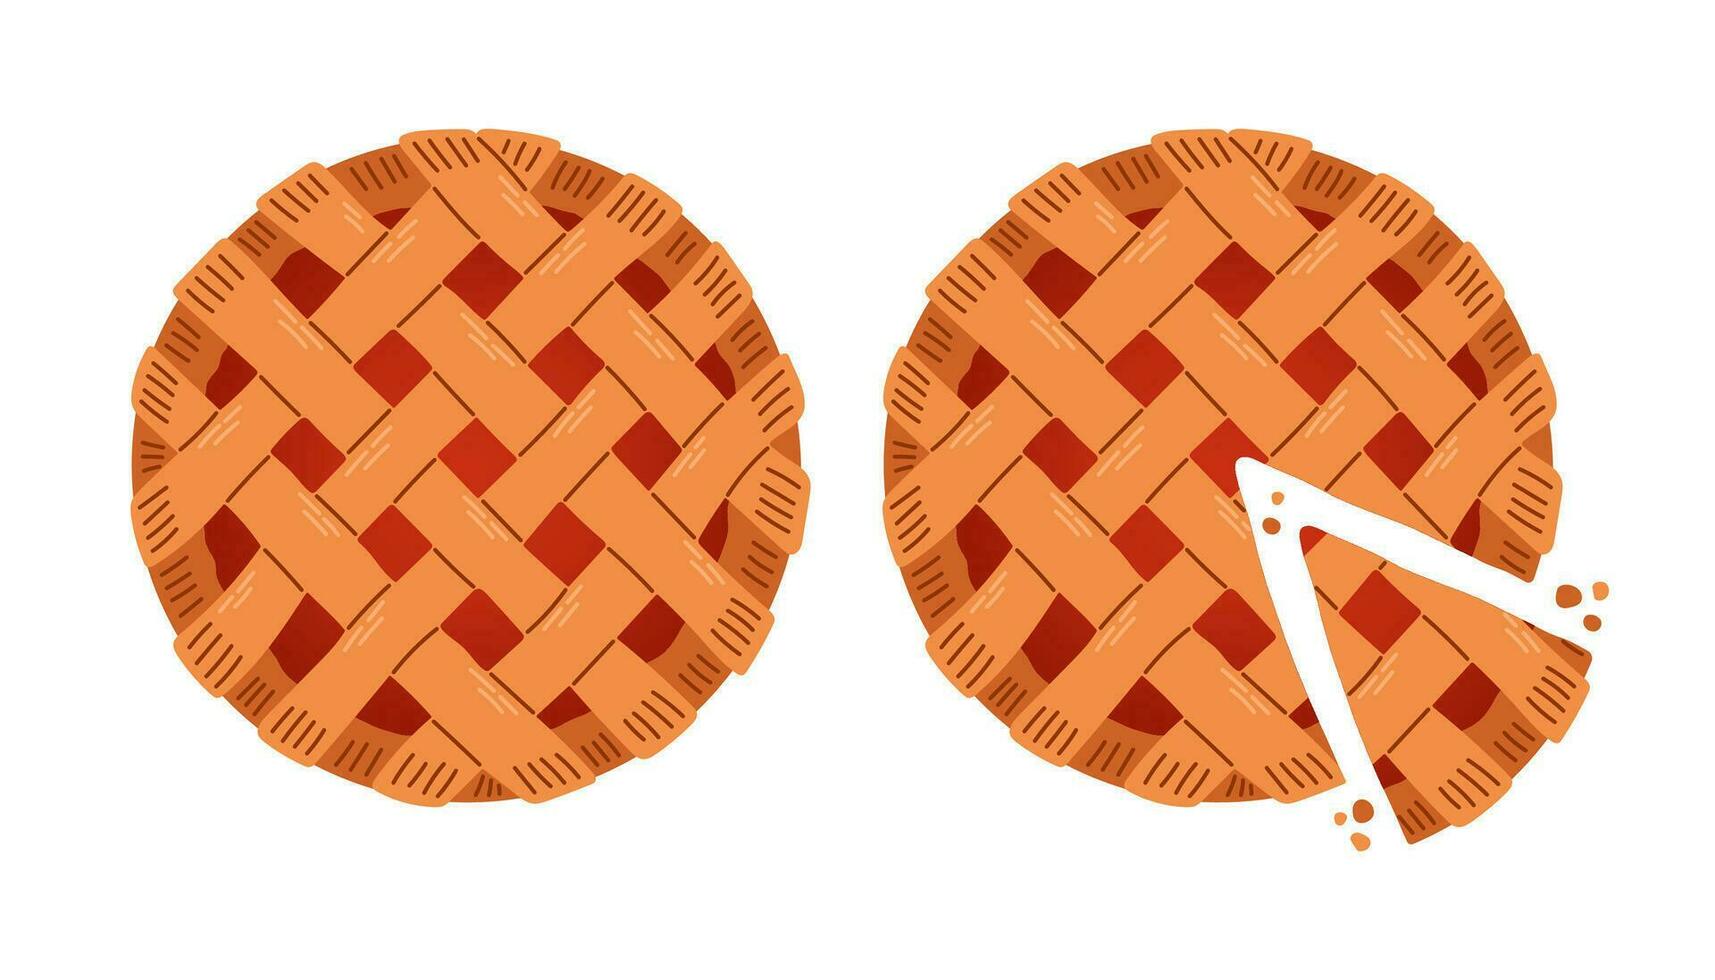 Pie top view. Cooked tasty round food pastry pie desserts exact vector illustrations. Vector illustration